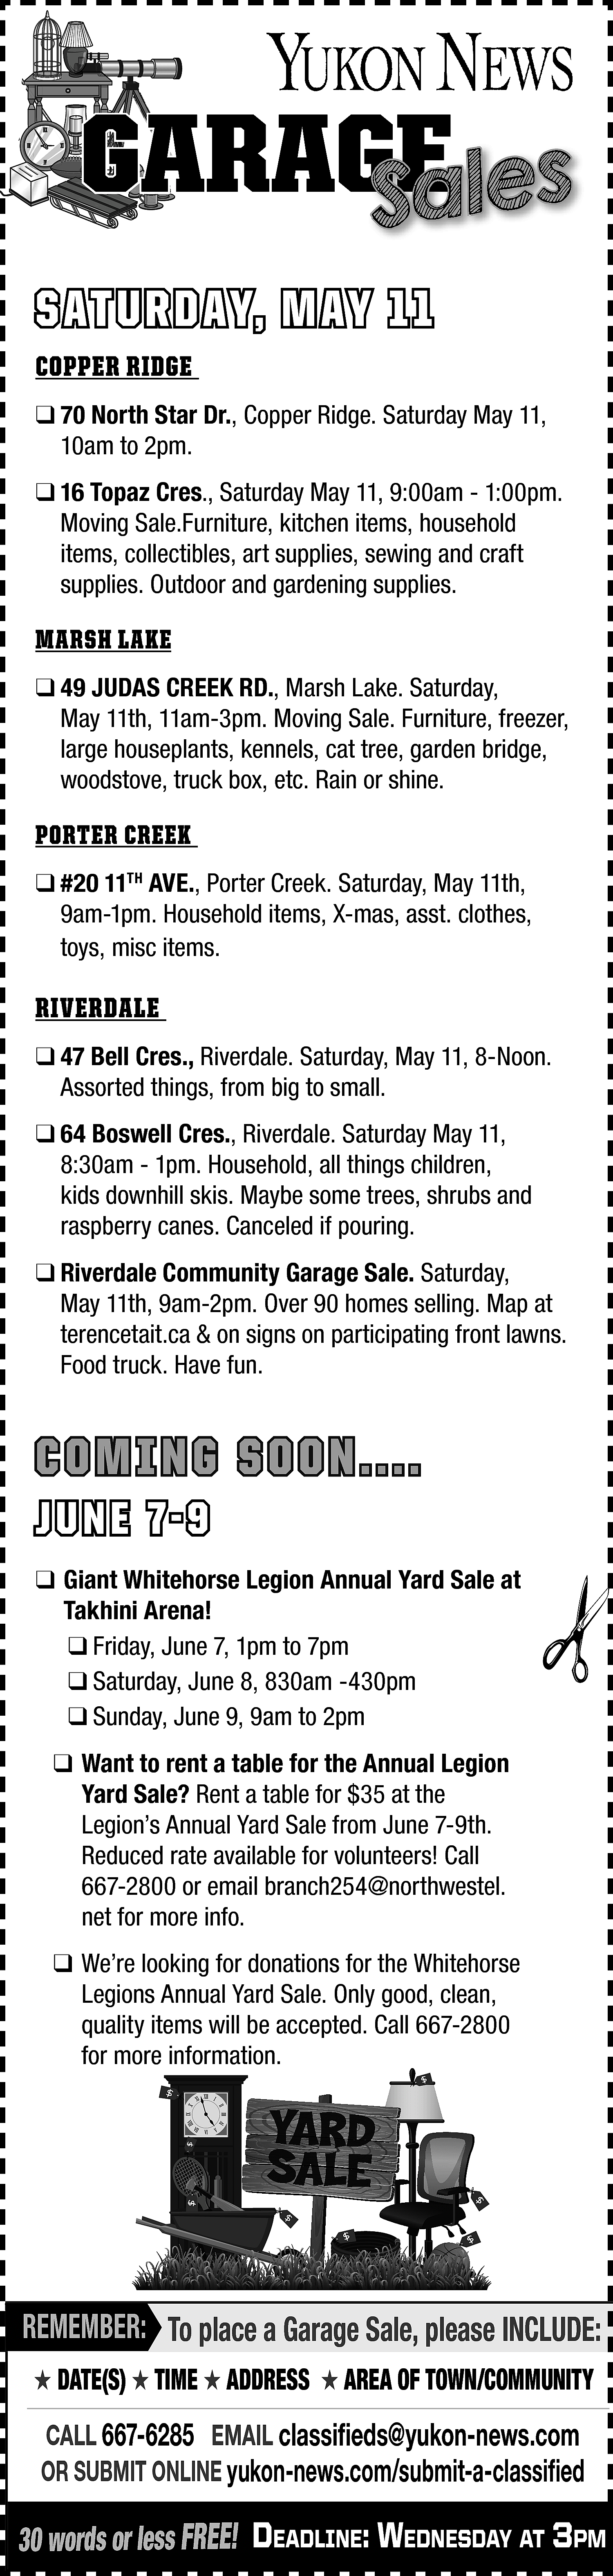 GARAGE <br>GE <br>Sales <br>SATURDAY, MAY  GARAGE  GE  Sales  SATURDAY, MAY 11  COPPER RIDGE  ❑ 70 North Star Dr., Copper Ridge. Saturday May 11,  10am to 2pm.  ❑ 16 Topaz Cres., Saturday May 11, 9:00am - 1:00pm.  Moving Sale.Furniture, kitchen items, household  items, collectibles, art supplies, sewing and craft  supplies. Outdoor and gardening supplies.    MARSH LAKE  ❑ 49 JUDAS CREEK RD., Marsh Lake. Saturday,  May 11th, 11am-3pm. Moving Sale. Furniture, freezer,  large houseplants, kennels, cat tree, garden bridge,  woodstove, truck box, etc. Rain or shine.    PORTER CREEK  ❑ #20 11TH AVE., Porter Creek. Saturday, May 11th,  9am-1pm. Household items, X-mas, asst. clothes,  toys, misc items.    RIVERDALE  ❑ 47 Bell Cres., Riverdale. Saturday, May 11, 8-Noon.  Assorted things, from big to small.  ❑ 64 Boswell Cres., Riverdale. Saturday May 11,  8:30am - 1pm. Household, all things children,  kids downhill skis. Maybe some trees, shrubs and  raspberry canes. Canceled if pouring.  ❑ Riverdale Community Garage Sale. Saturday,  May 11th, 9am-2pm. Over 90 homes selling. Map at  terencetait.ca & on signs on participating front lawns.  Food truck. Have fun.    COMING SOON....  JUNE 7-9    ❑ Giant Whitehorse Legion Annual Yard Sale at  Takhini Arena!  ❑ Friday, June 7, 1pm to 7pm  ❑ Saturday, June 8, 830am -430pm  ❑ Sunday, June 9, 9am to 2pm  ❑ Want to rent a table for the Annual Legion  Yard Sale? Rent a table for $35 at the  Legion’s Annual Yard Sale from June 7-9th.  Reduced rate available for volunteers! Call  667-2800 or email branch254@northwestel.  net for more info.  ❑ We’re looking for donations for the Whitehorse  Legions Annual Yard Sale. Only good, clean,  quality items will be accepted. Call 667-2800  for more information.    REMEMBER: To place a Garage Sale, please INCLUDE:  ★ DATE(S) ★ TIME ★ ADDRESS ★ AREA OF TOWN/COMMUNITY    CALL 667-6285 EMAIL classifieds@yukon-news.com  OR SUBMIT ONLINE yukon-news.com/submit-a-classified    30 words or less FREE! DeaDline: WeDnesDay at 3pm    